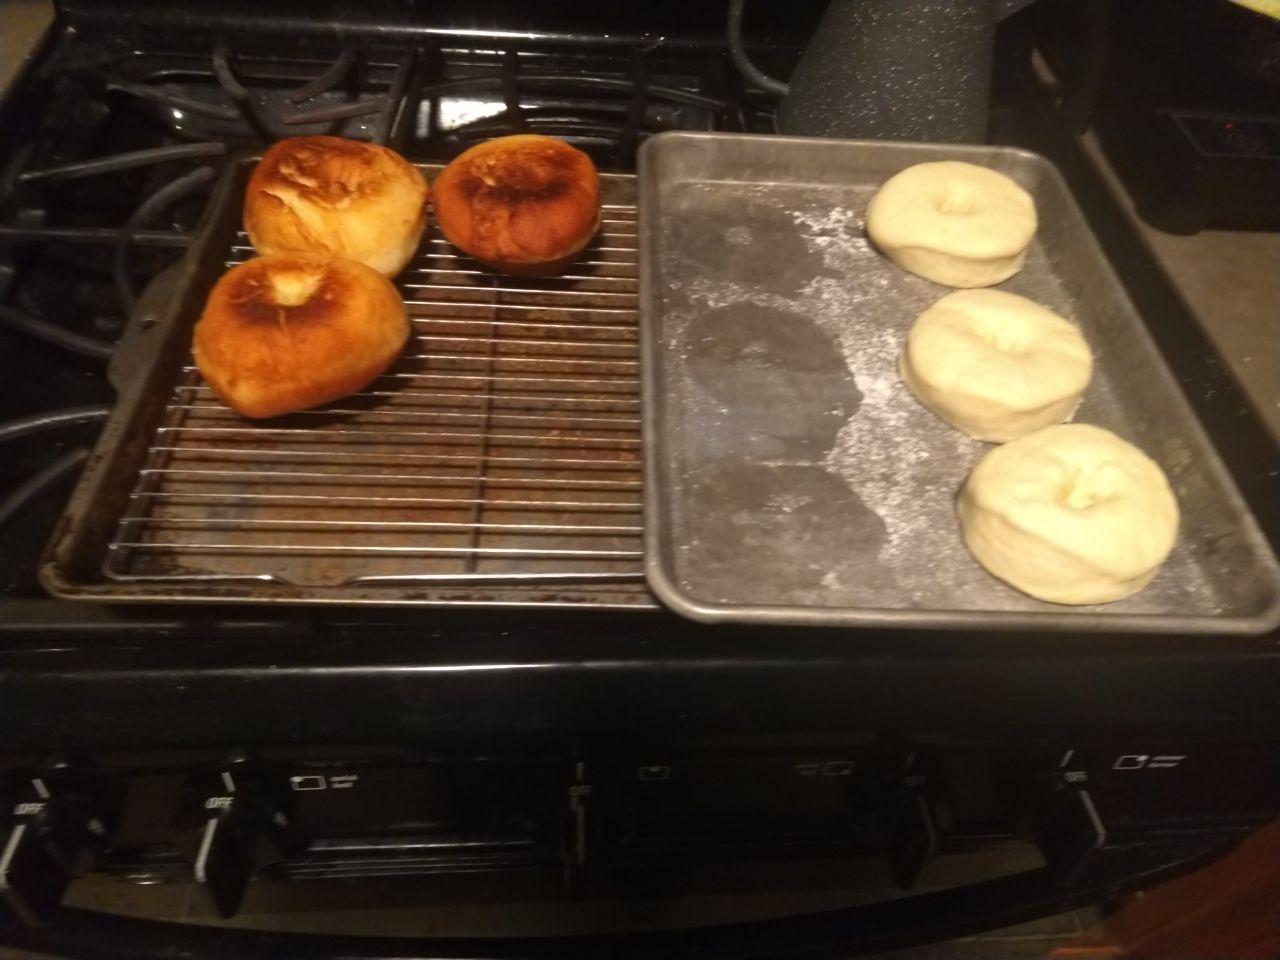 Fried donuts on a cooling rack next to raised dough.